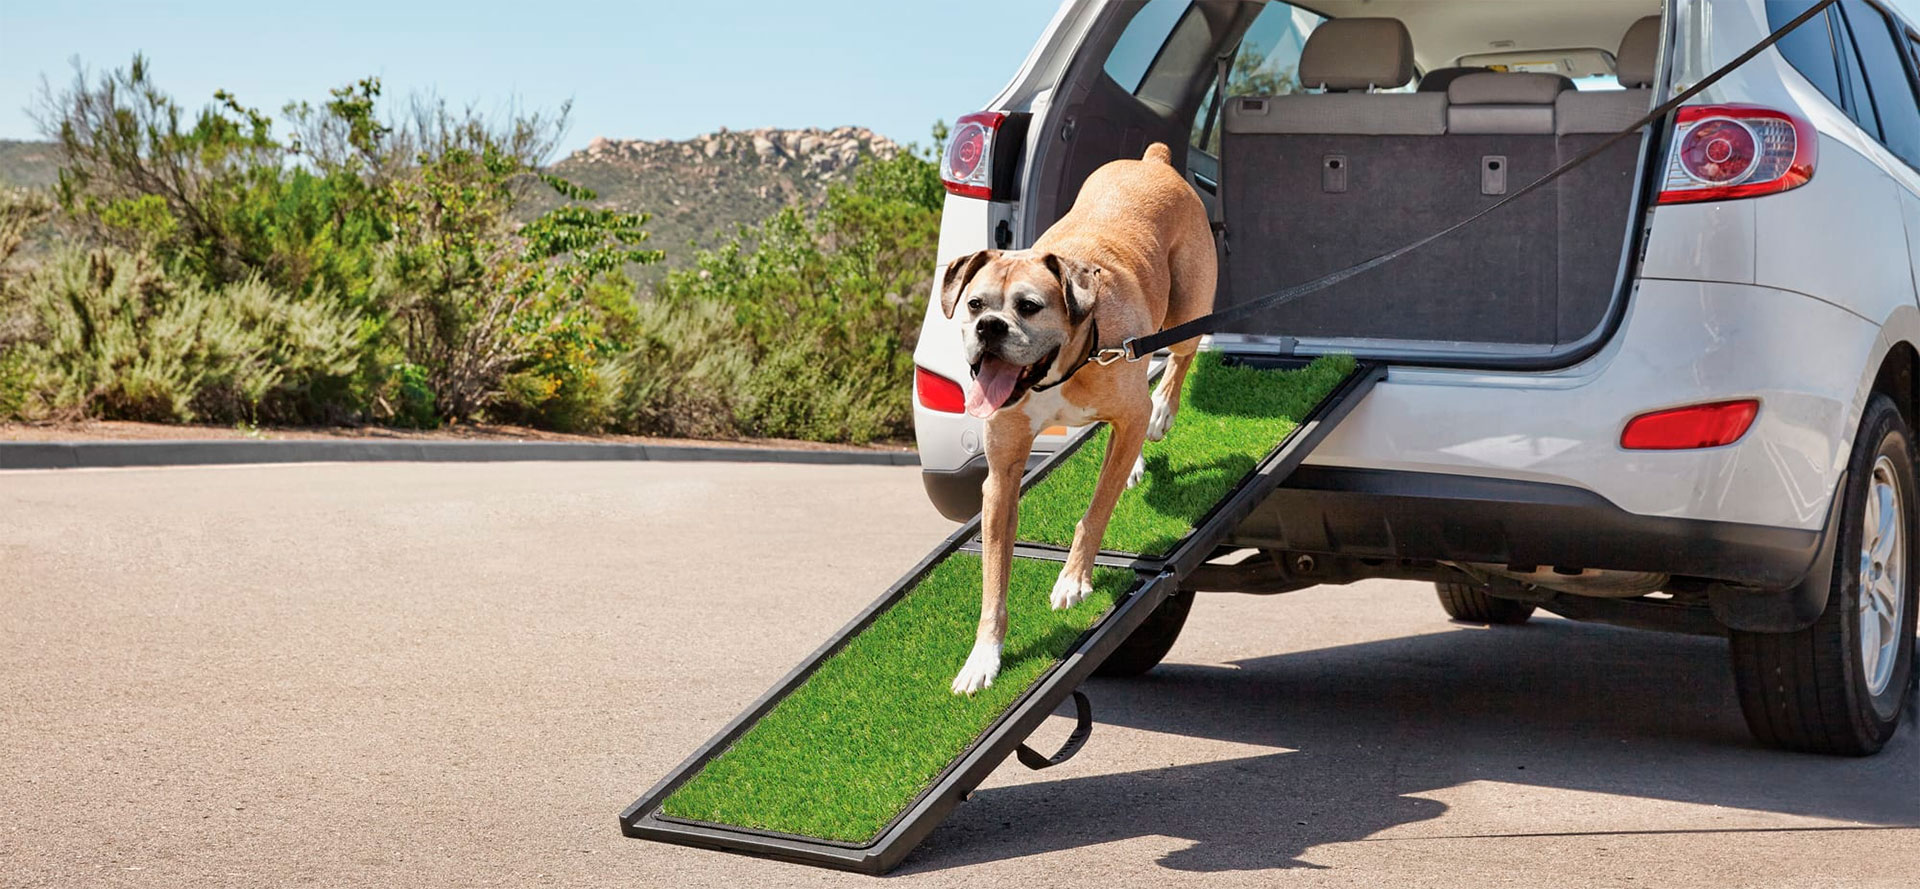 Telescopic Wooden Ramp Travel Use GYMAX Dog Pet Ramp 100 KG Capacity 98cm-166cm Non-slip Surface Portable Pets Step Stairs Ladder Perfect for Car 